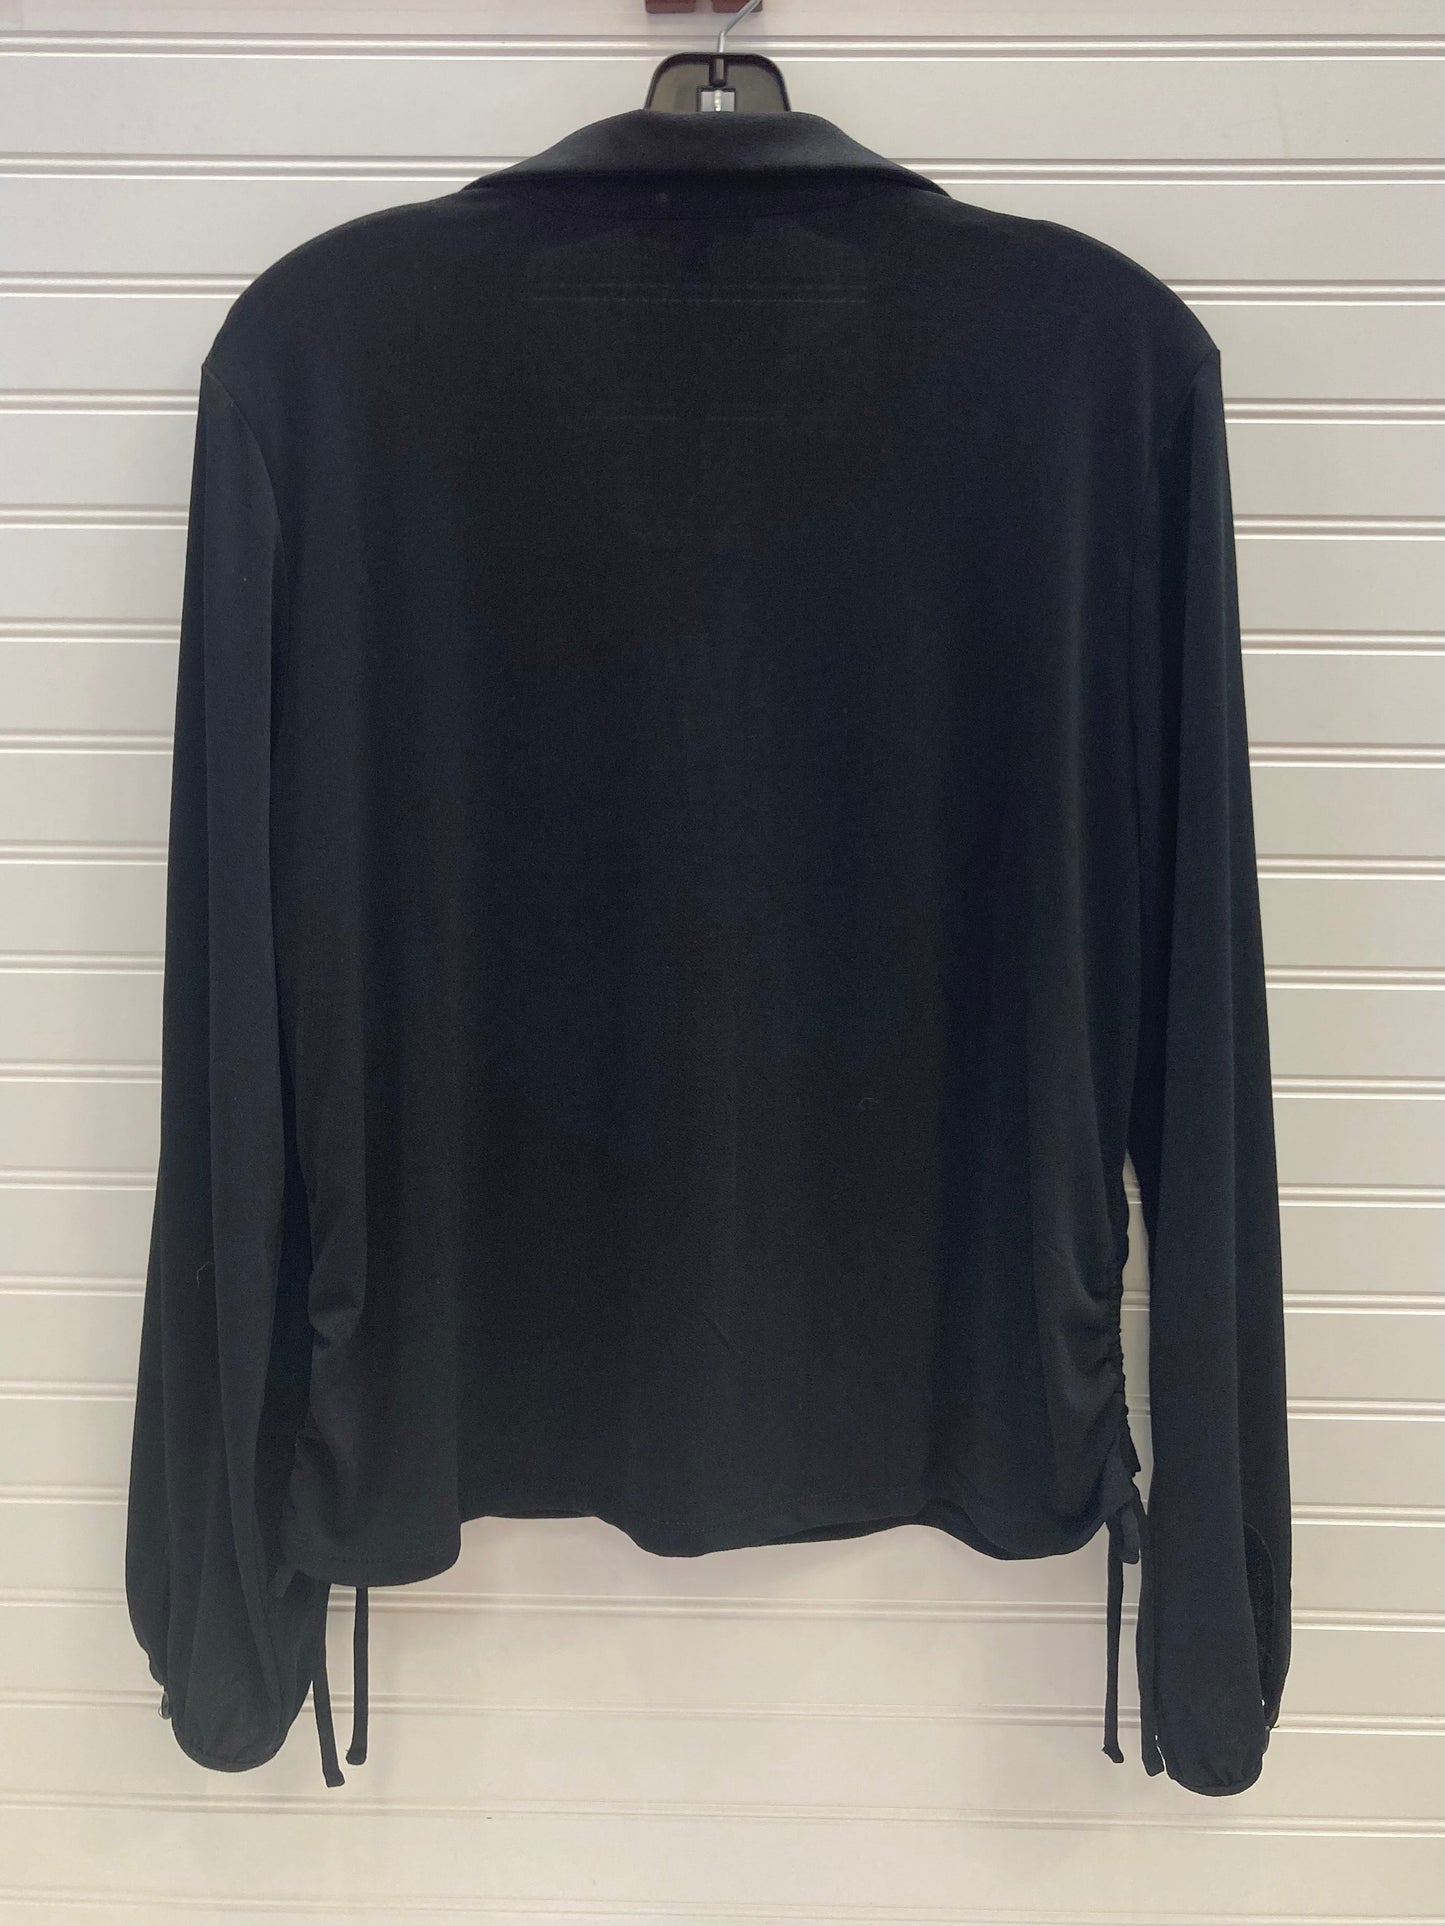 Black Blouse Long Sleeve Adrianna Papell, Size L